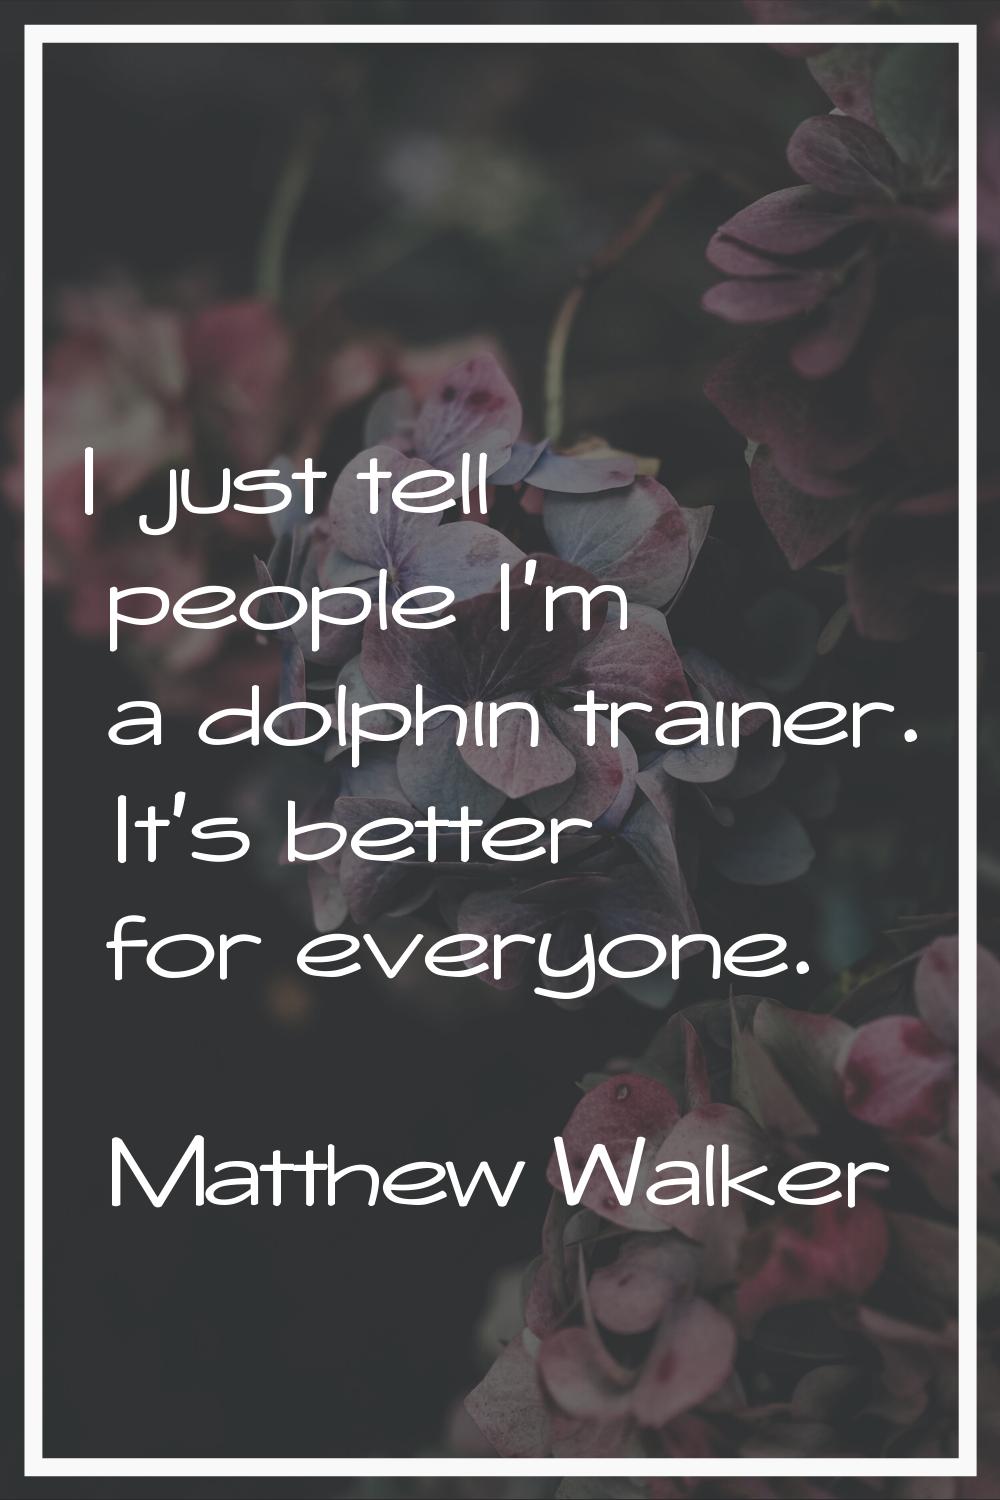 I just tell people I'm a dolphin trainer. It's better for everyone.